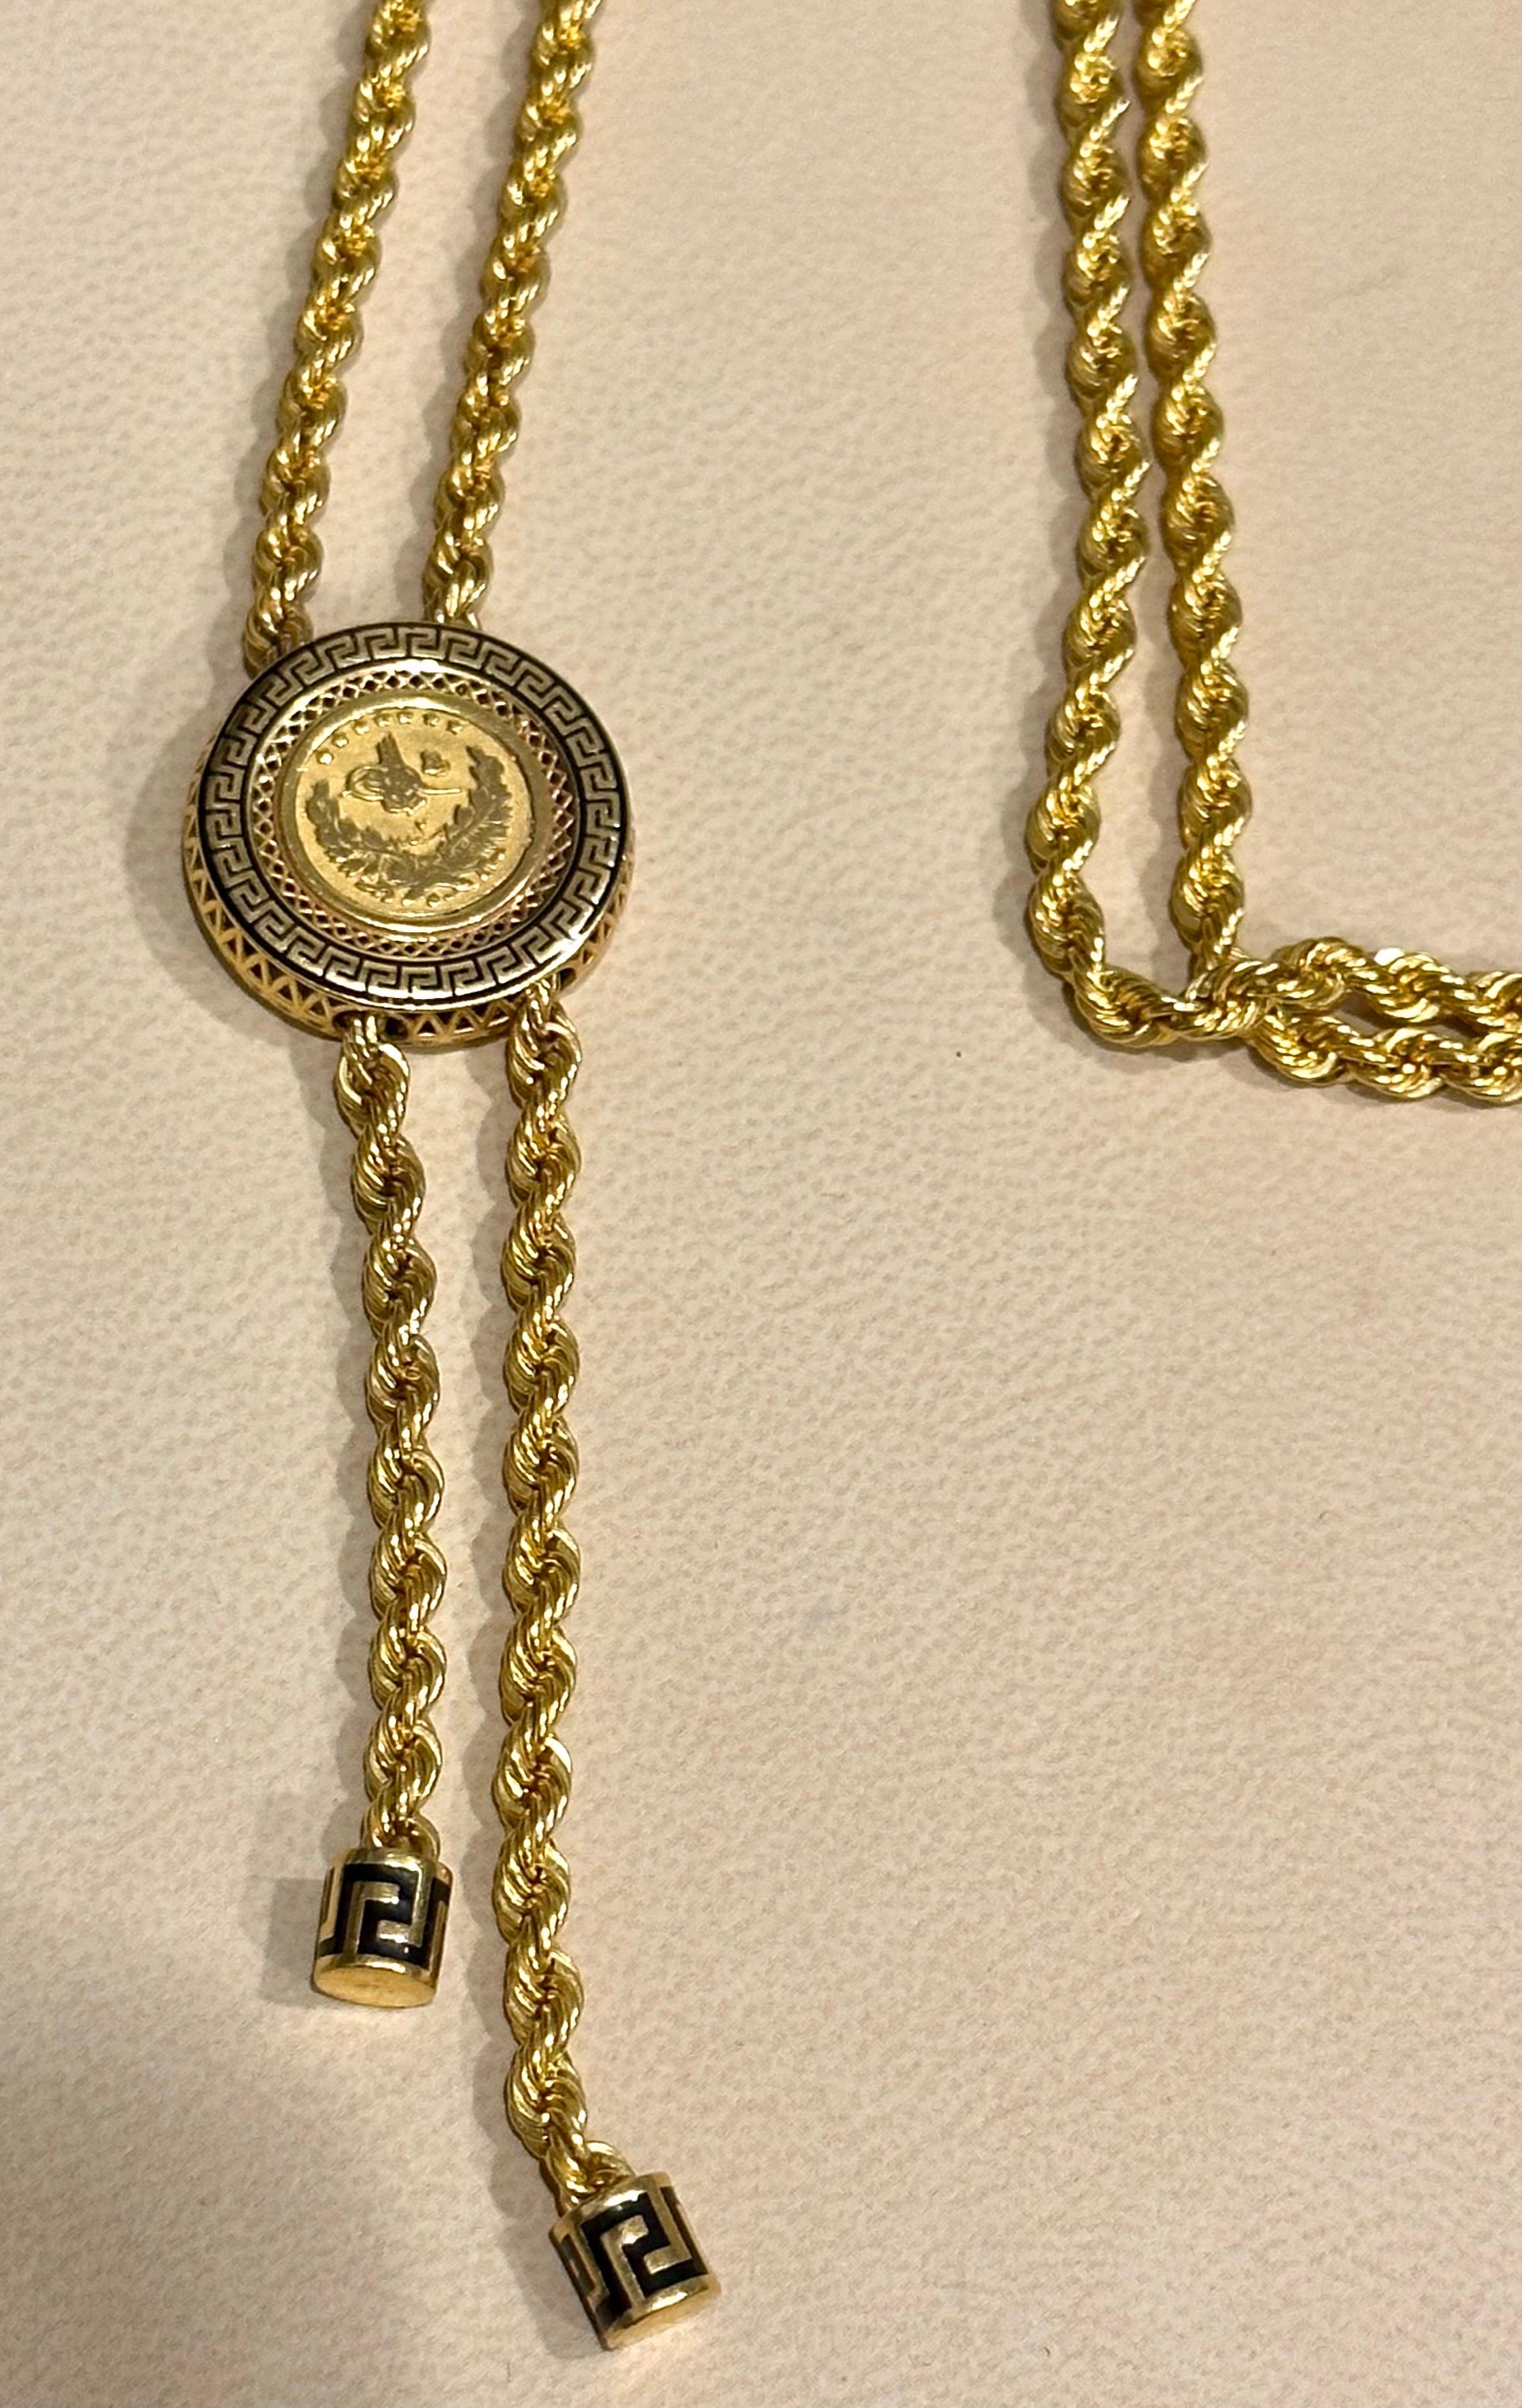 21 Karat Yellow Gold Coin Vintage Necklace with Hanging 3